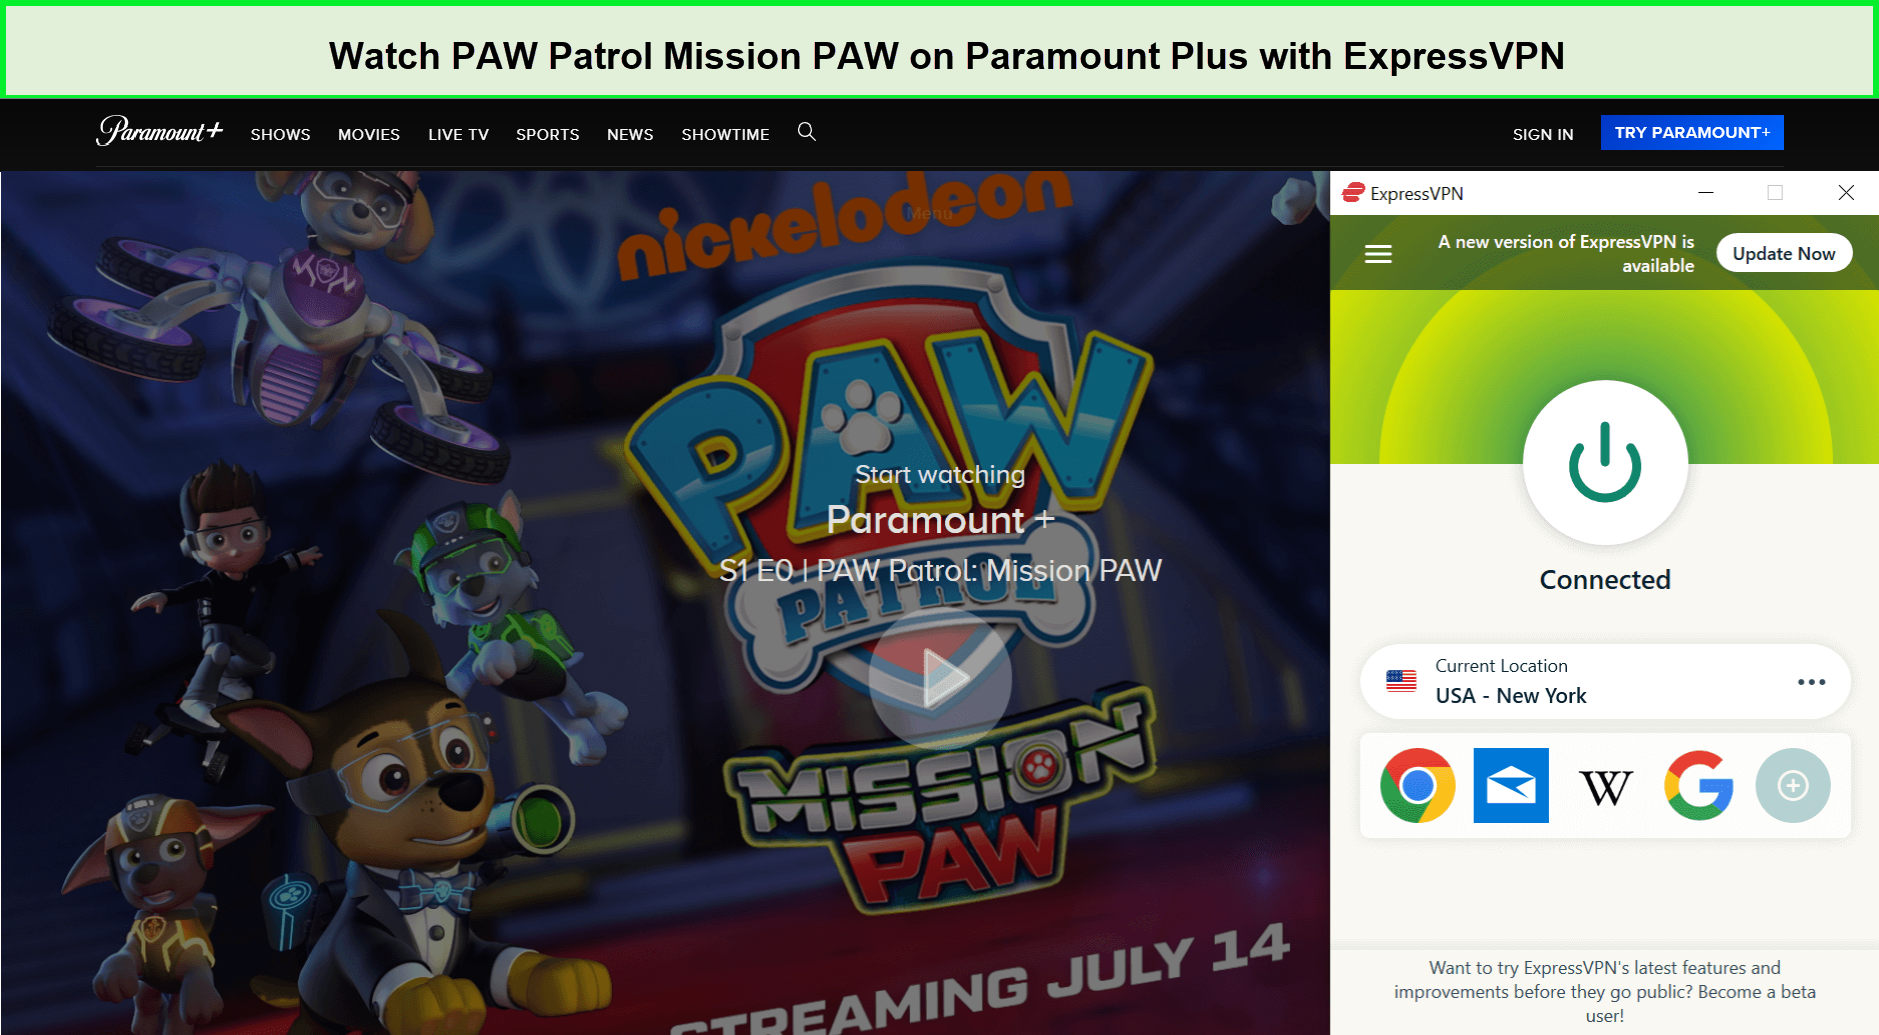 Watch-PAW-Patrol-Mission-PAW-in-Hong Kong-on-Paramount-Plus-with-ExpressVPN